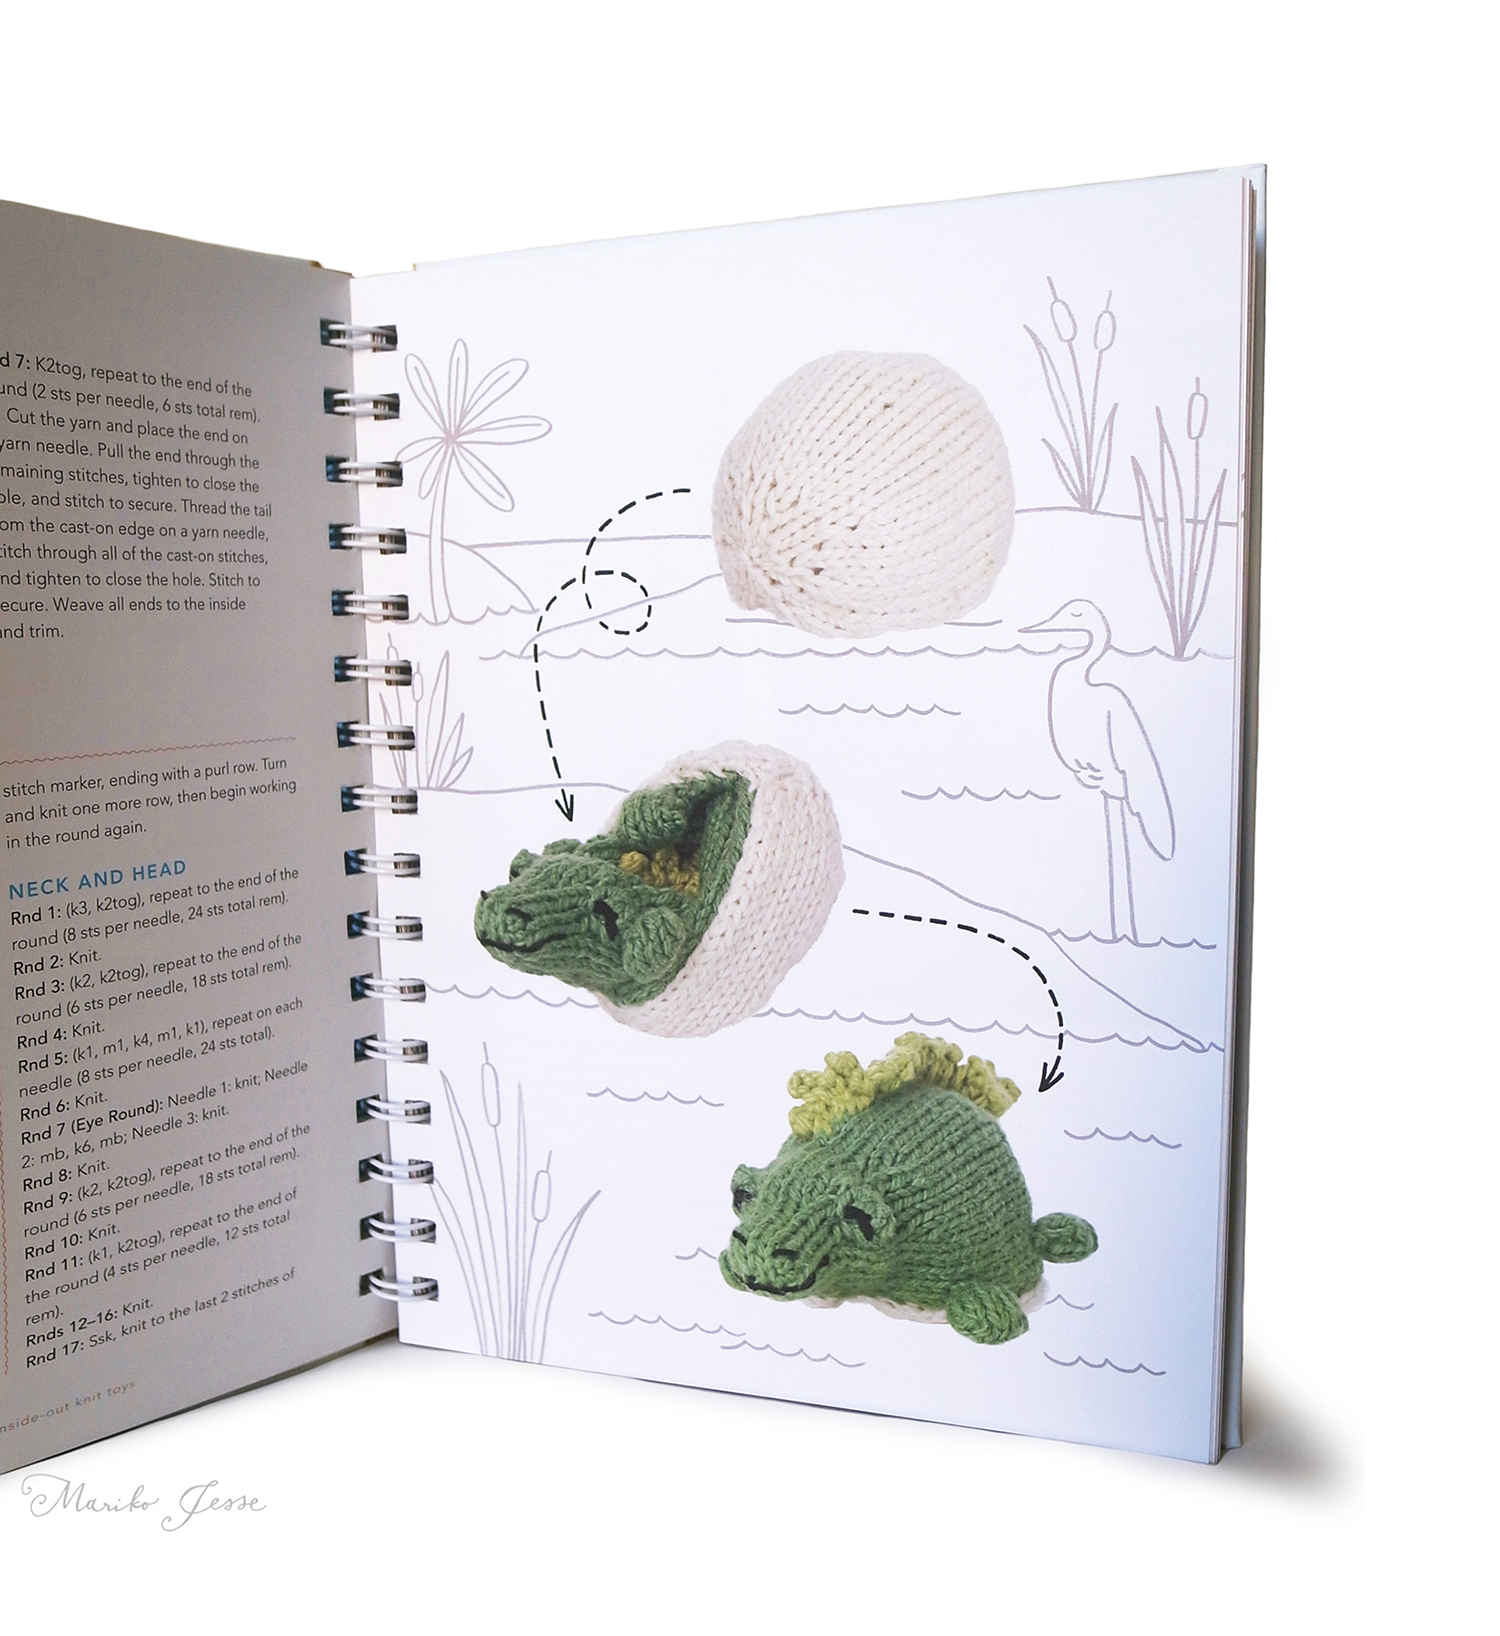 Topsy-turvy Inside-out knit toys book